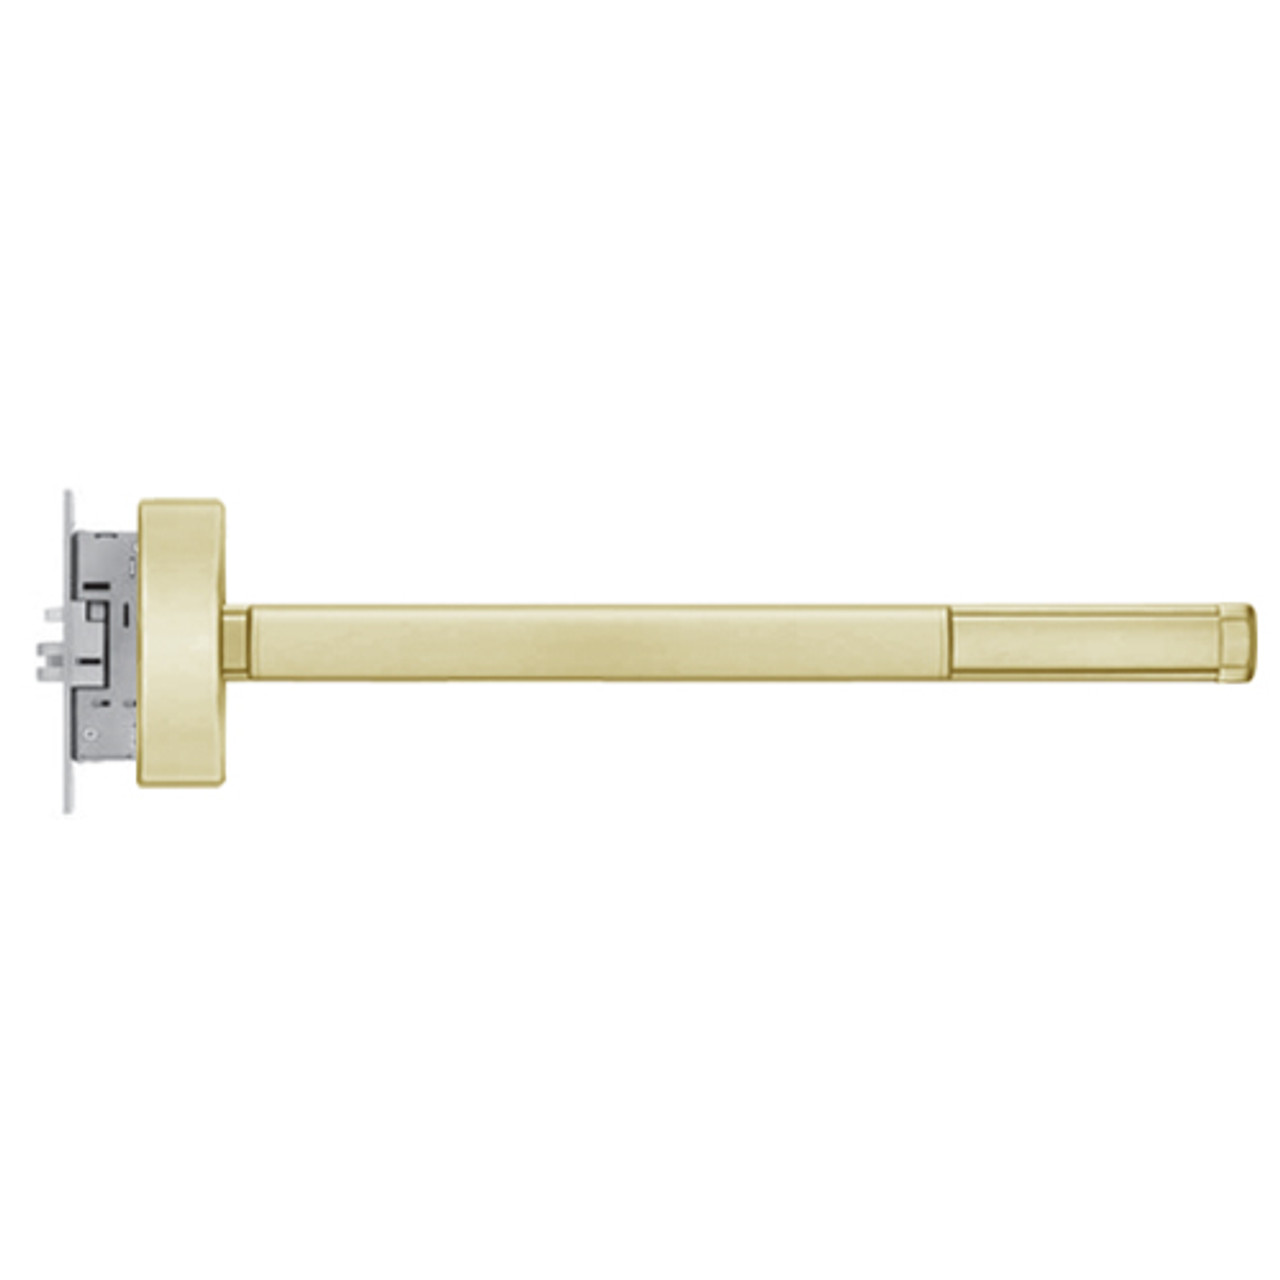 ELRFL2303-RHR-606-36 PHI 2300 Series Fire Rated Apex Mortise Exit Device with Electric Latch Retraction Prepped for Key Retracts Latchbolt in Satin Brass Finish